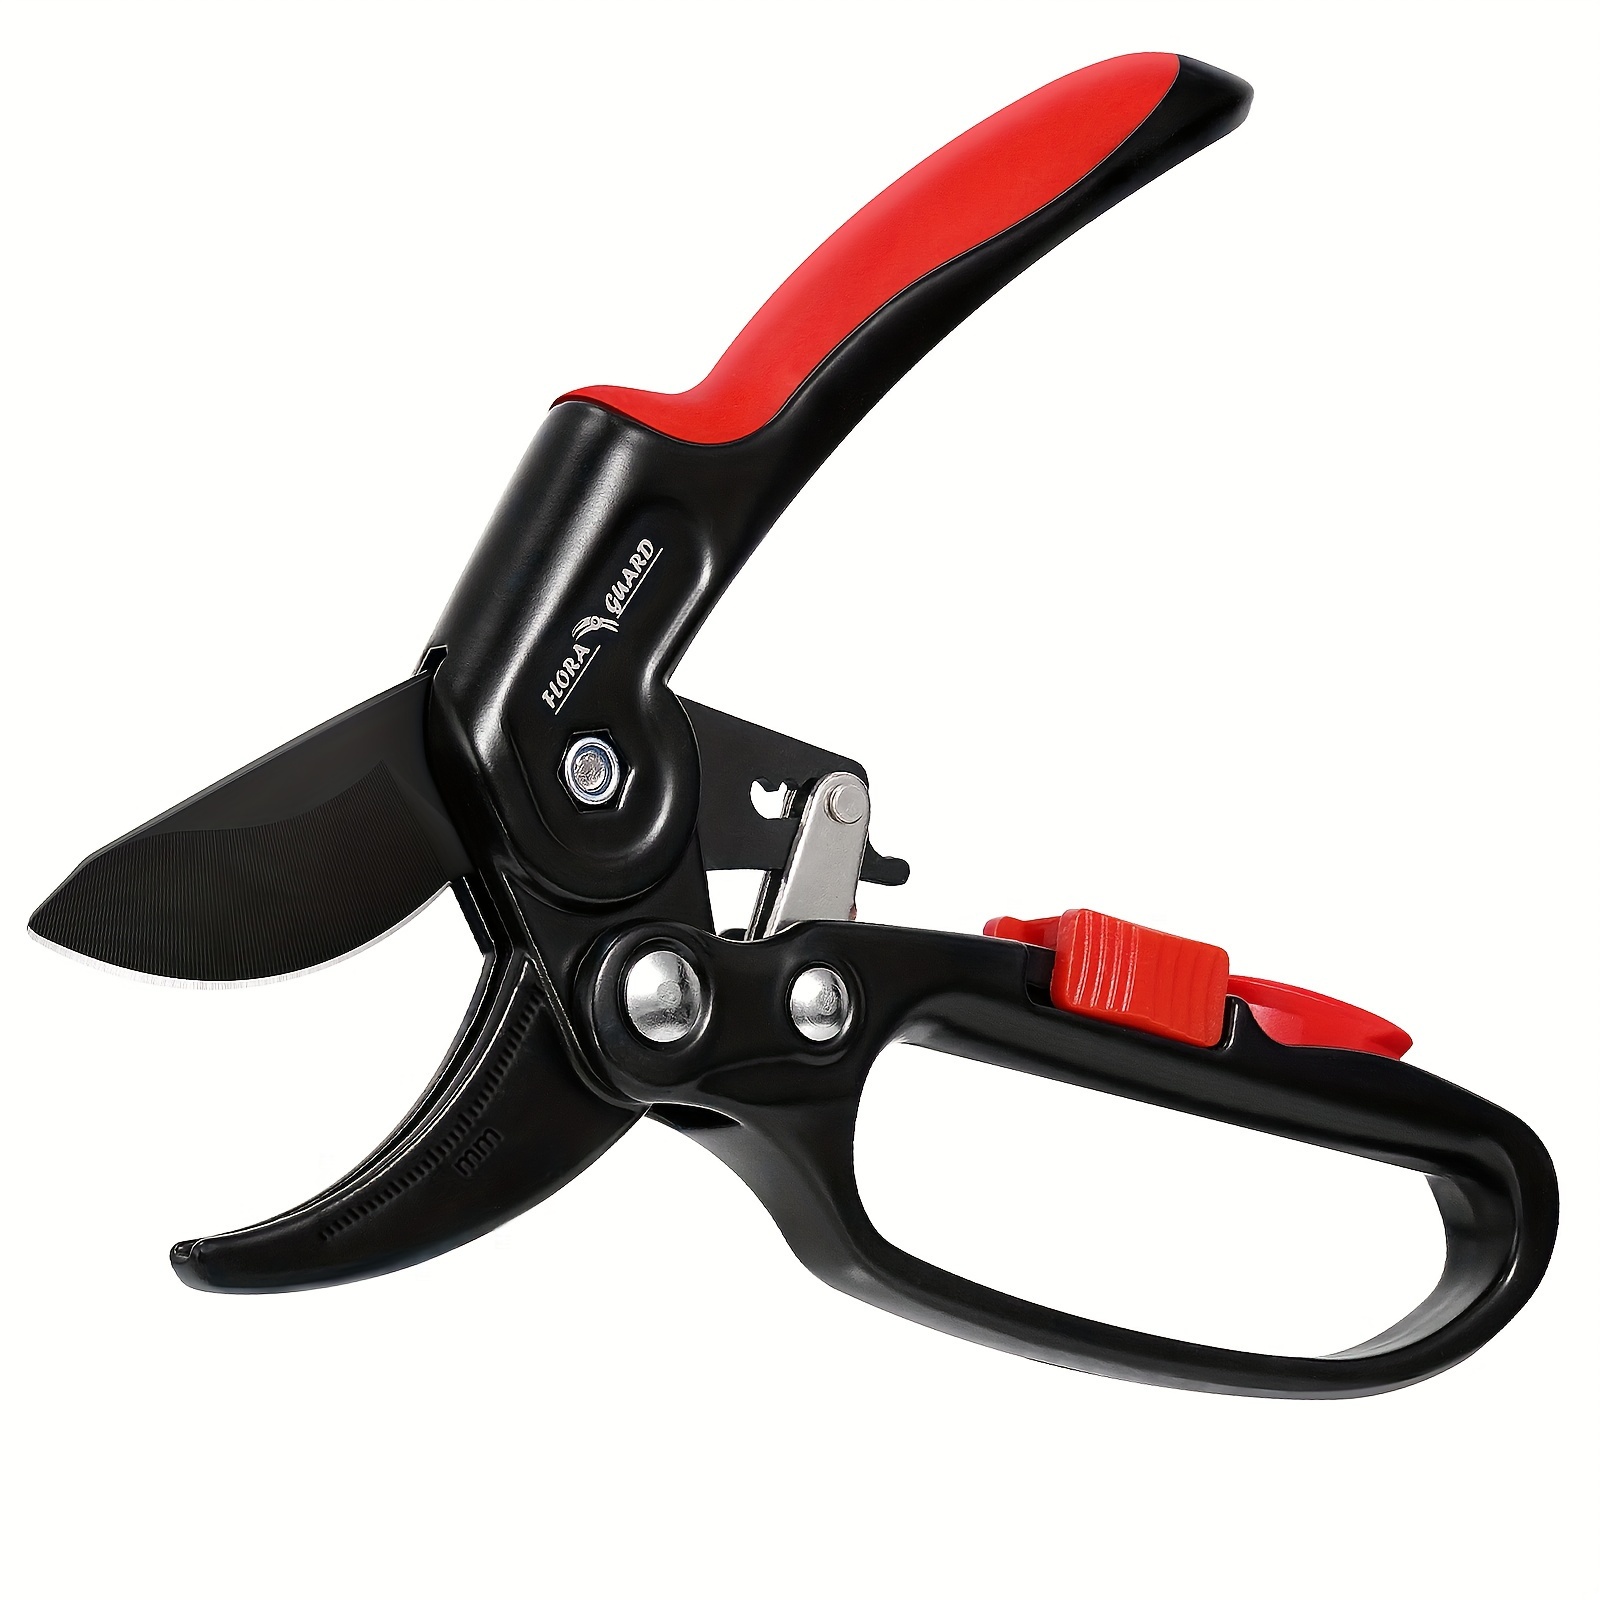 

Garden Clippers, Professional Ratchet Pruning Shears, Increases Cutting Power 3x, Sharp Gardening Scissors, Cutting Rose, Flower, Hedge, Stem, Tree, Perfect For Weak Hands & Arthritis